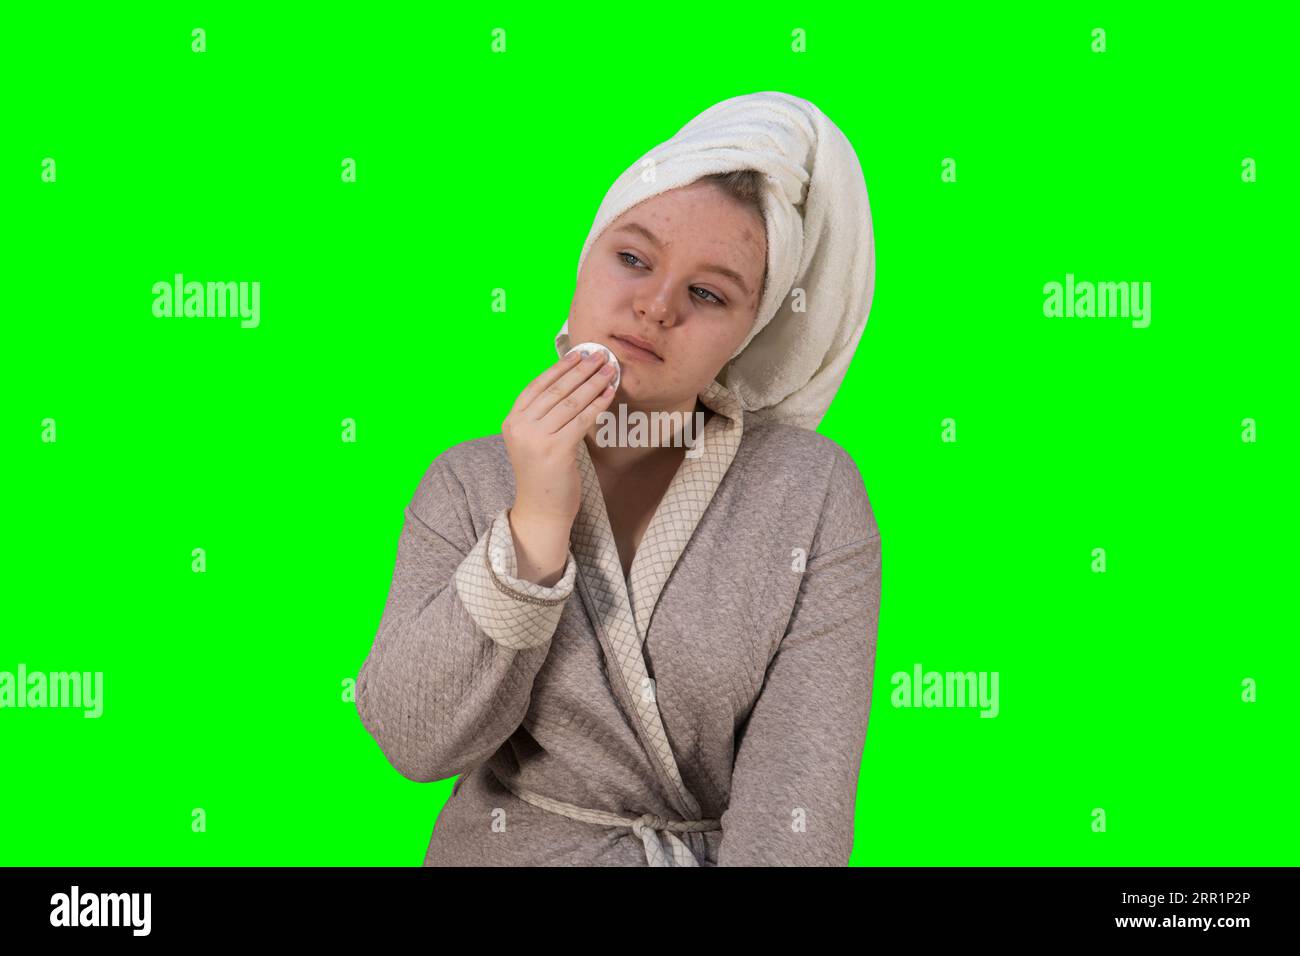 A girl in a dressing gown on a green background (chroma key) smears a rash on her face. Problem skin. Medicine, healthcare and home treatment concept Stock Photo